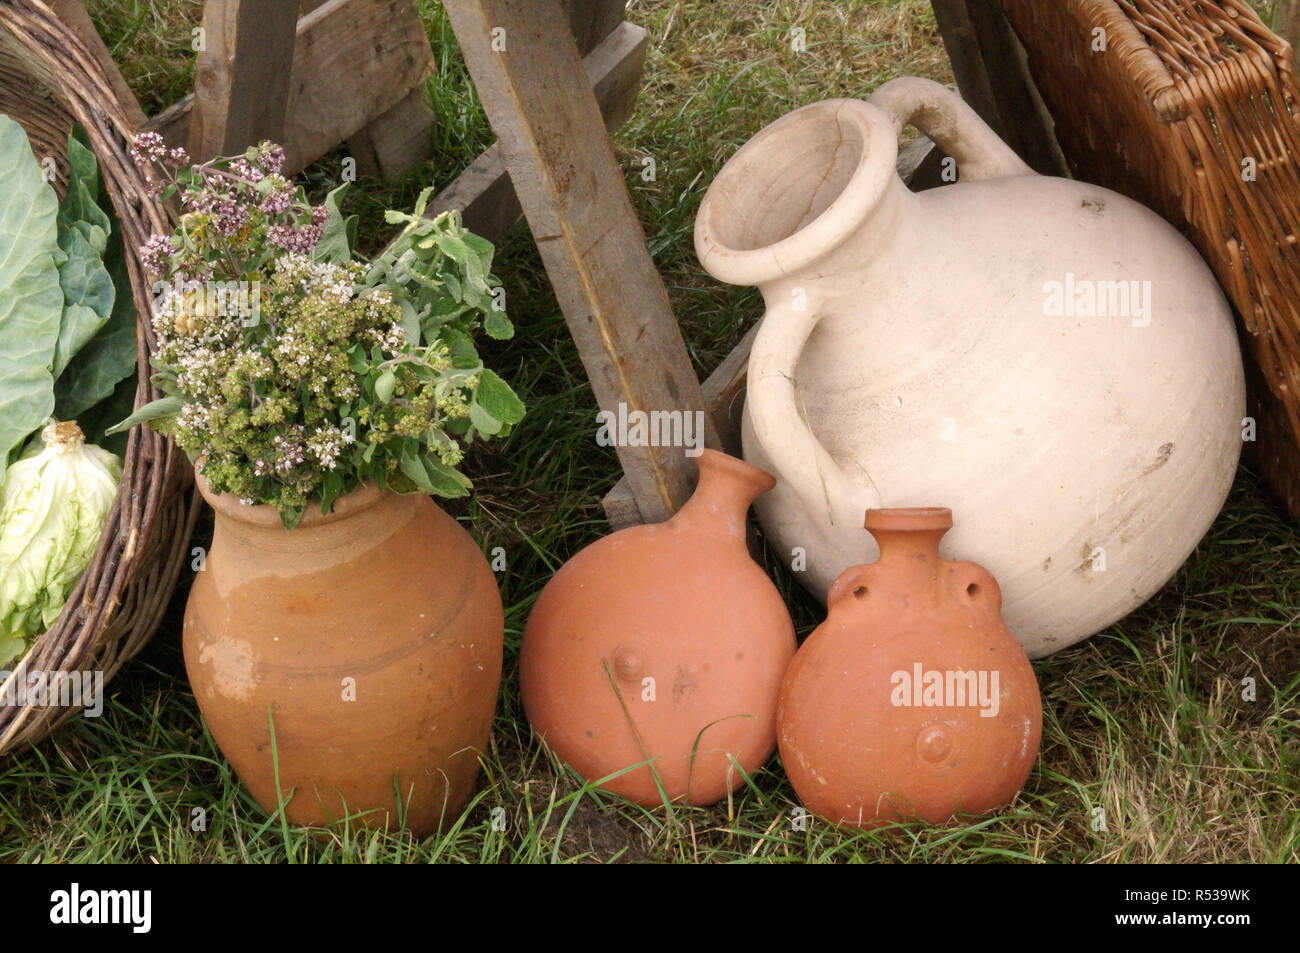 Roman pottery flasks and jugs, one with a bunch of herbs stuffed into it. Stock Photo